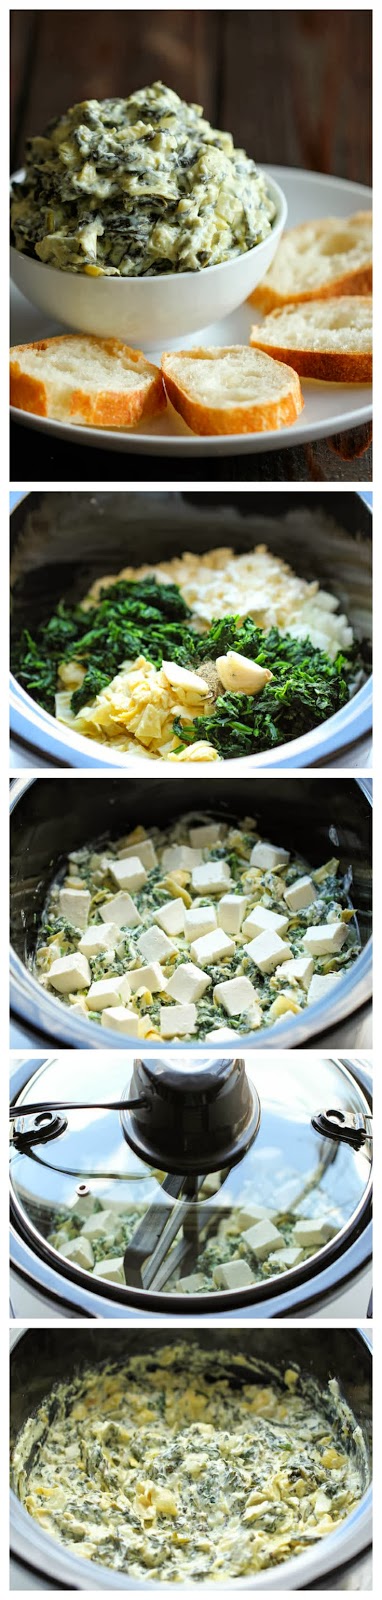 How To Slow Cooker Spinach and Artichoke Dip